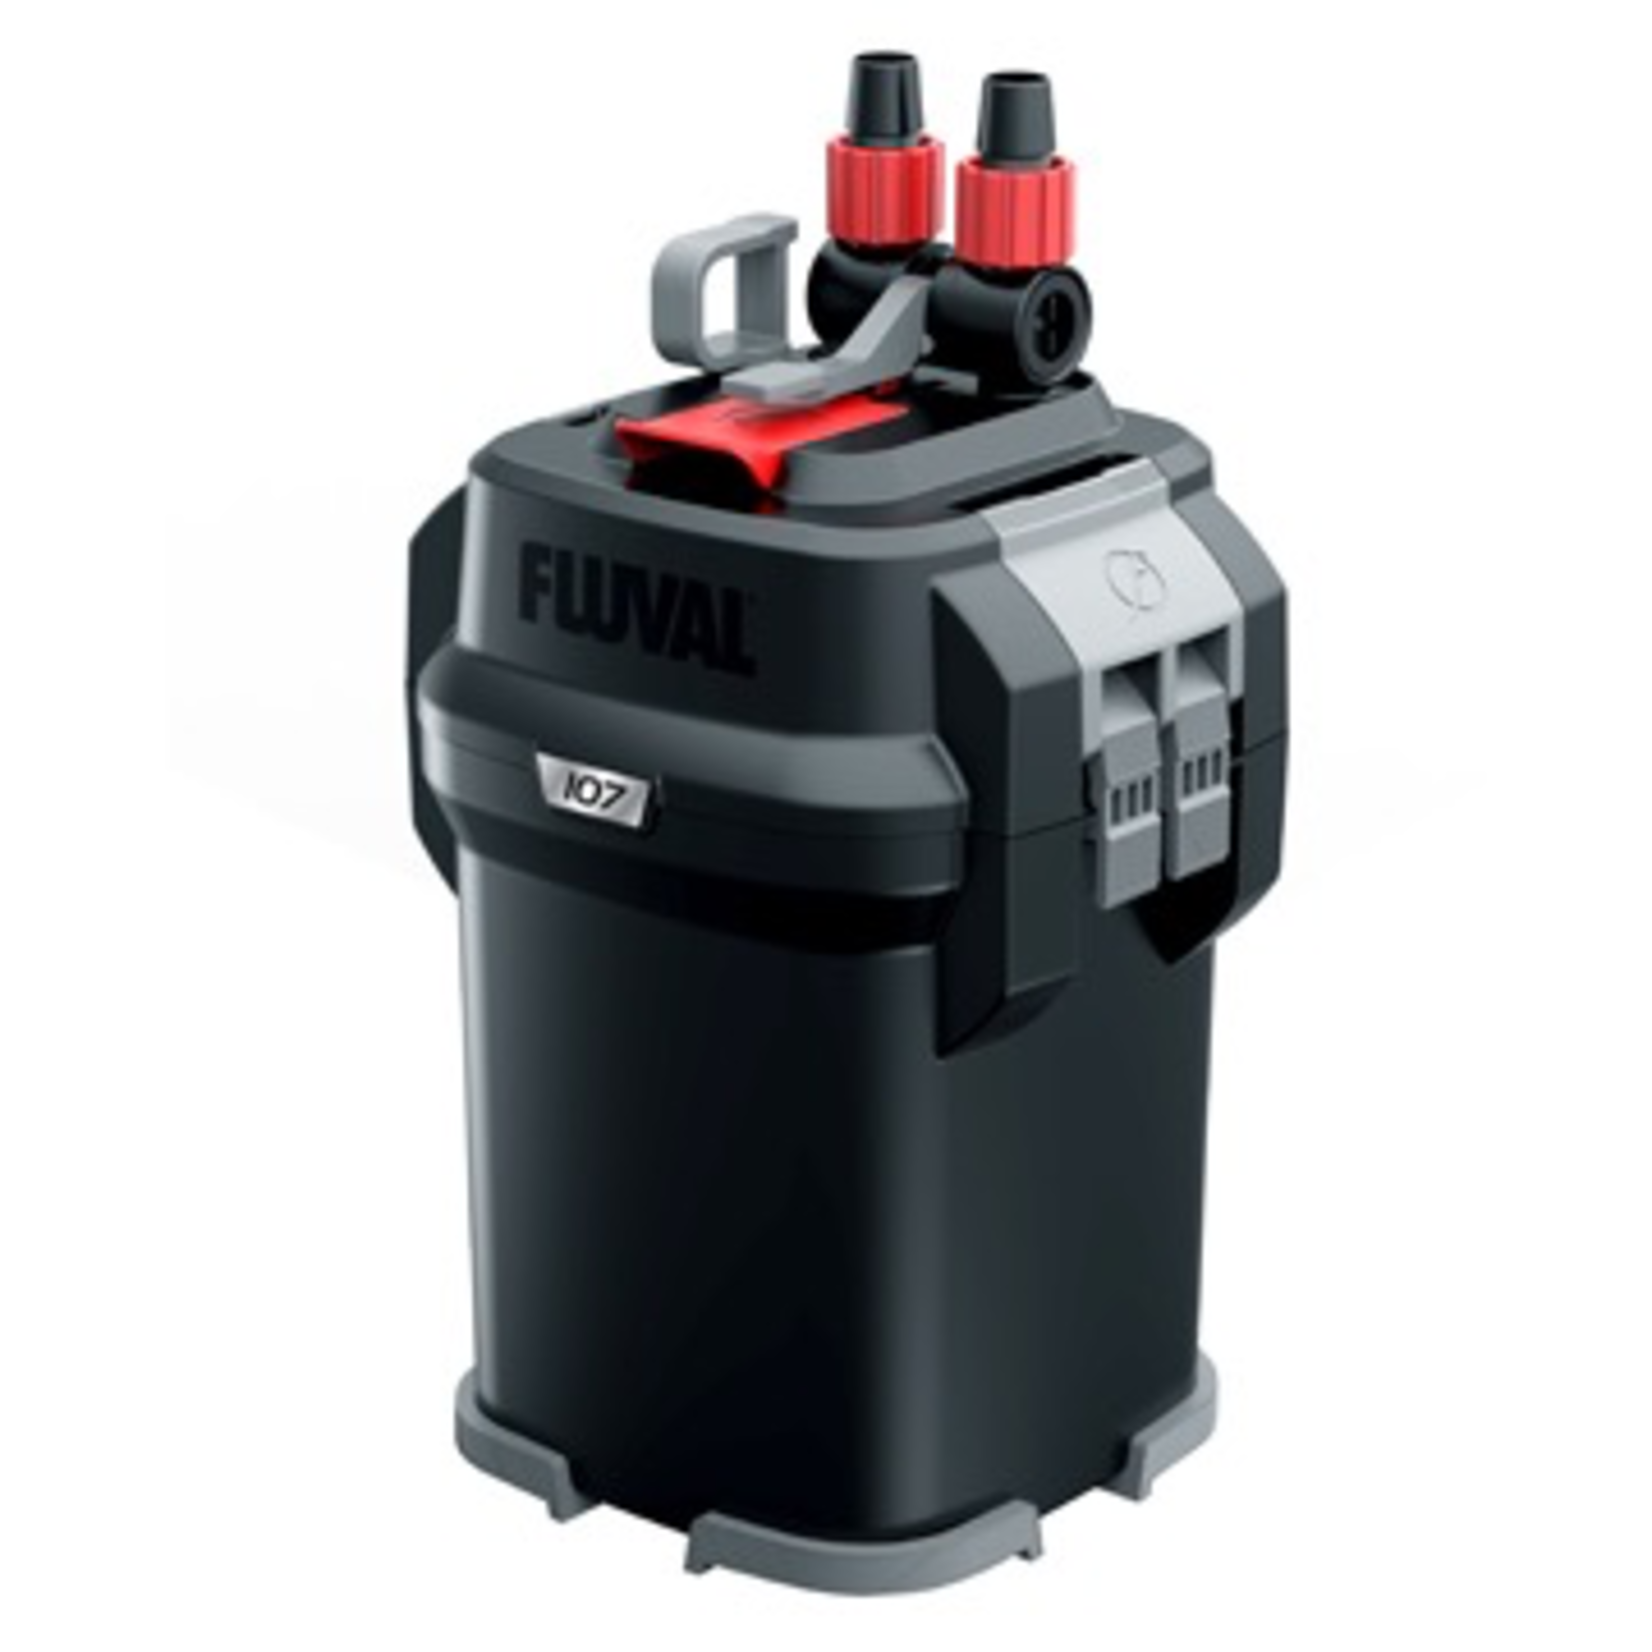 FLUVAL (W) Fluval 107 Performance Canister Filter, up to 130 L (30 US gal)